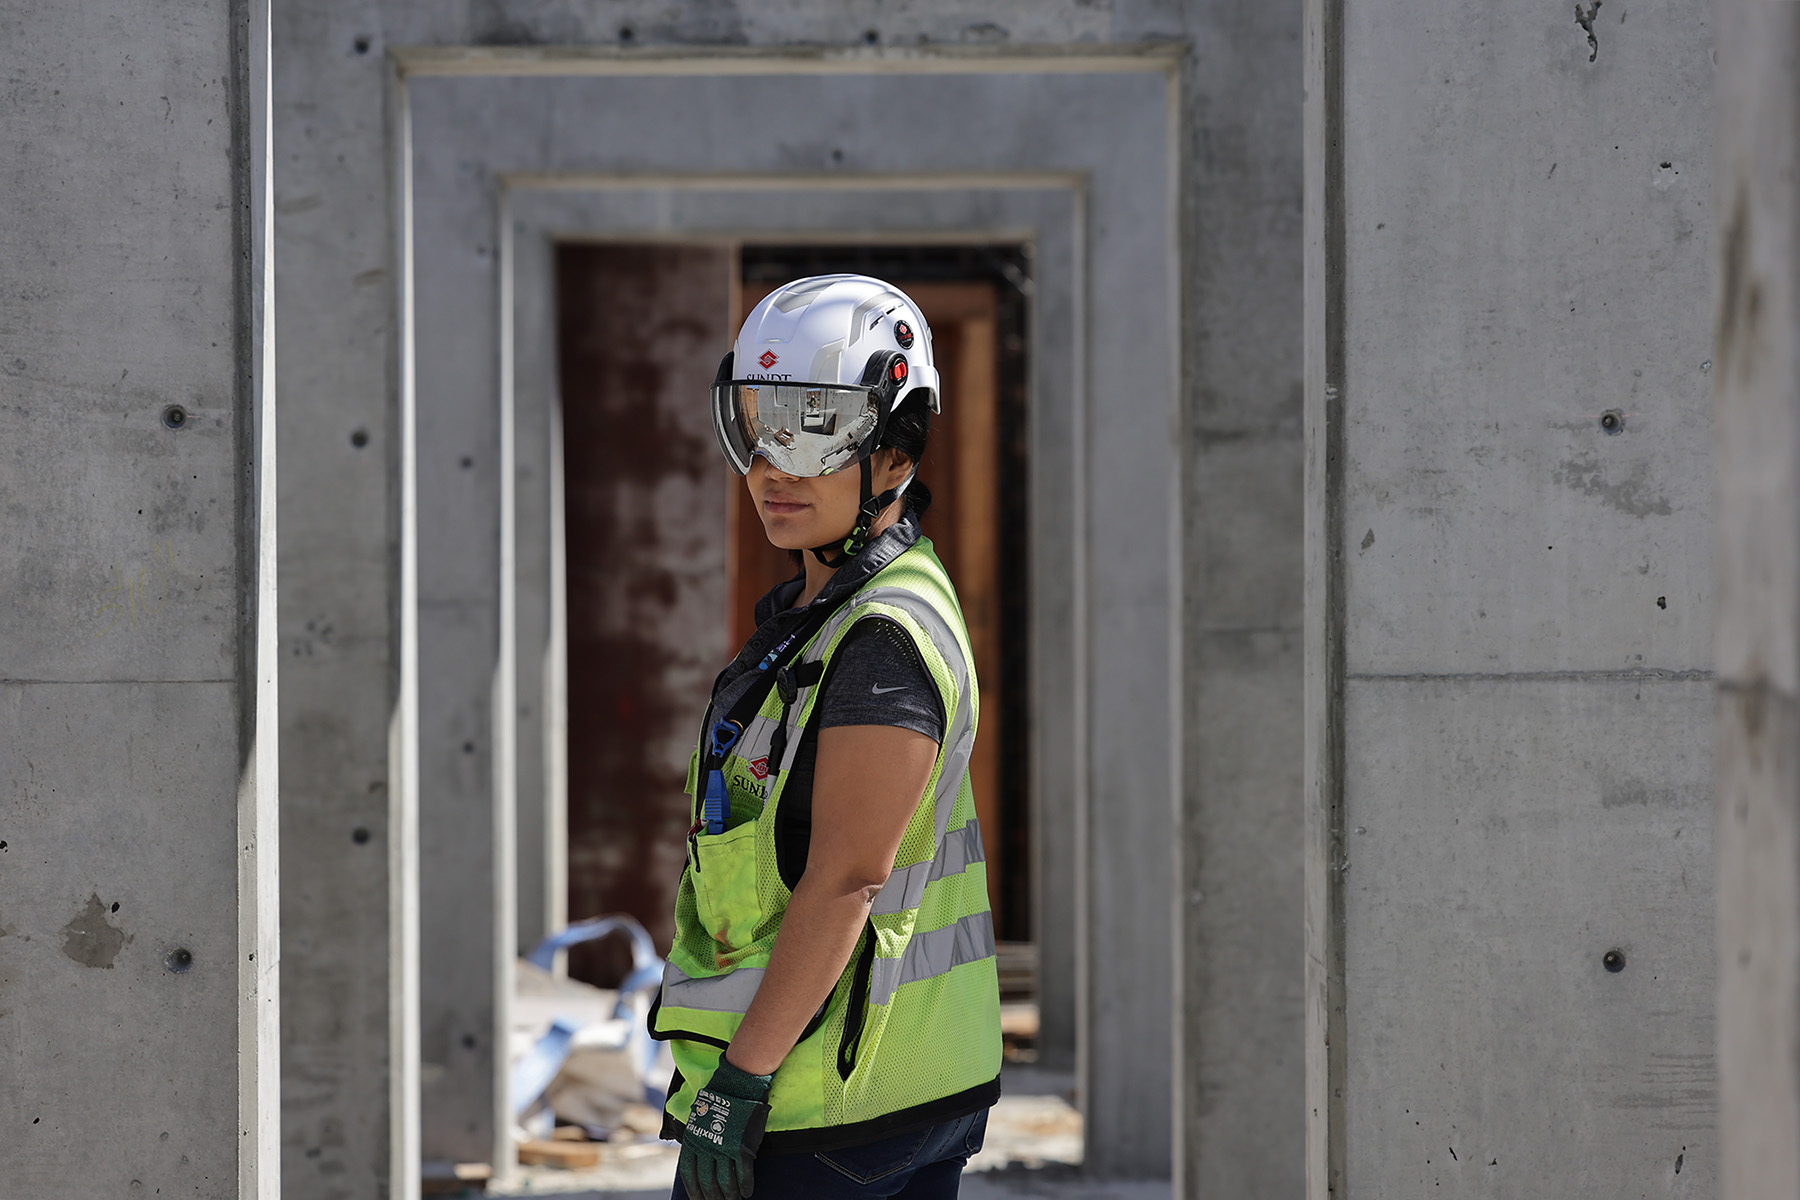 A photo of Pam Alvarado on the jobsite for Women in Construction Week 2022